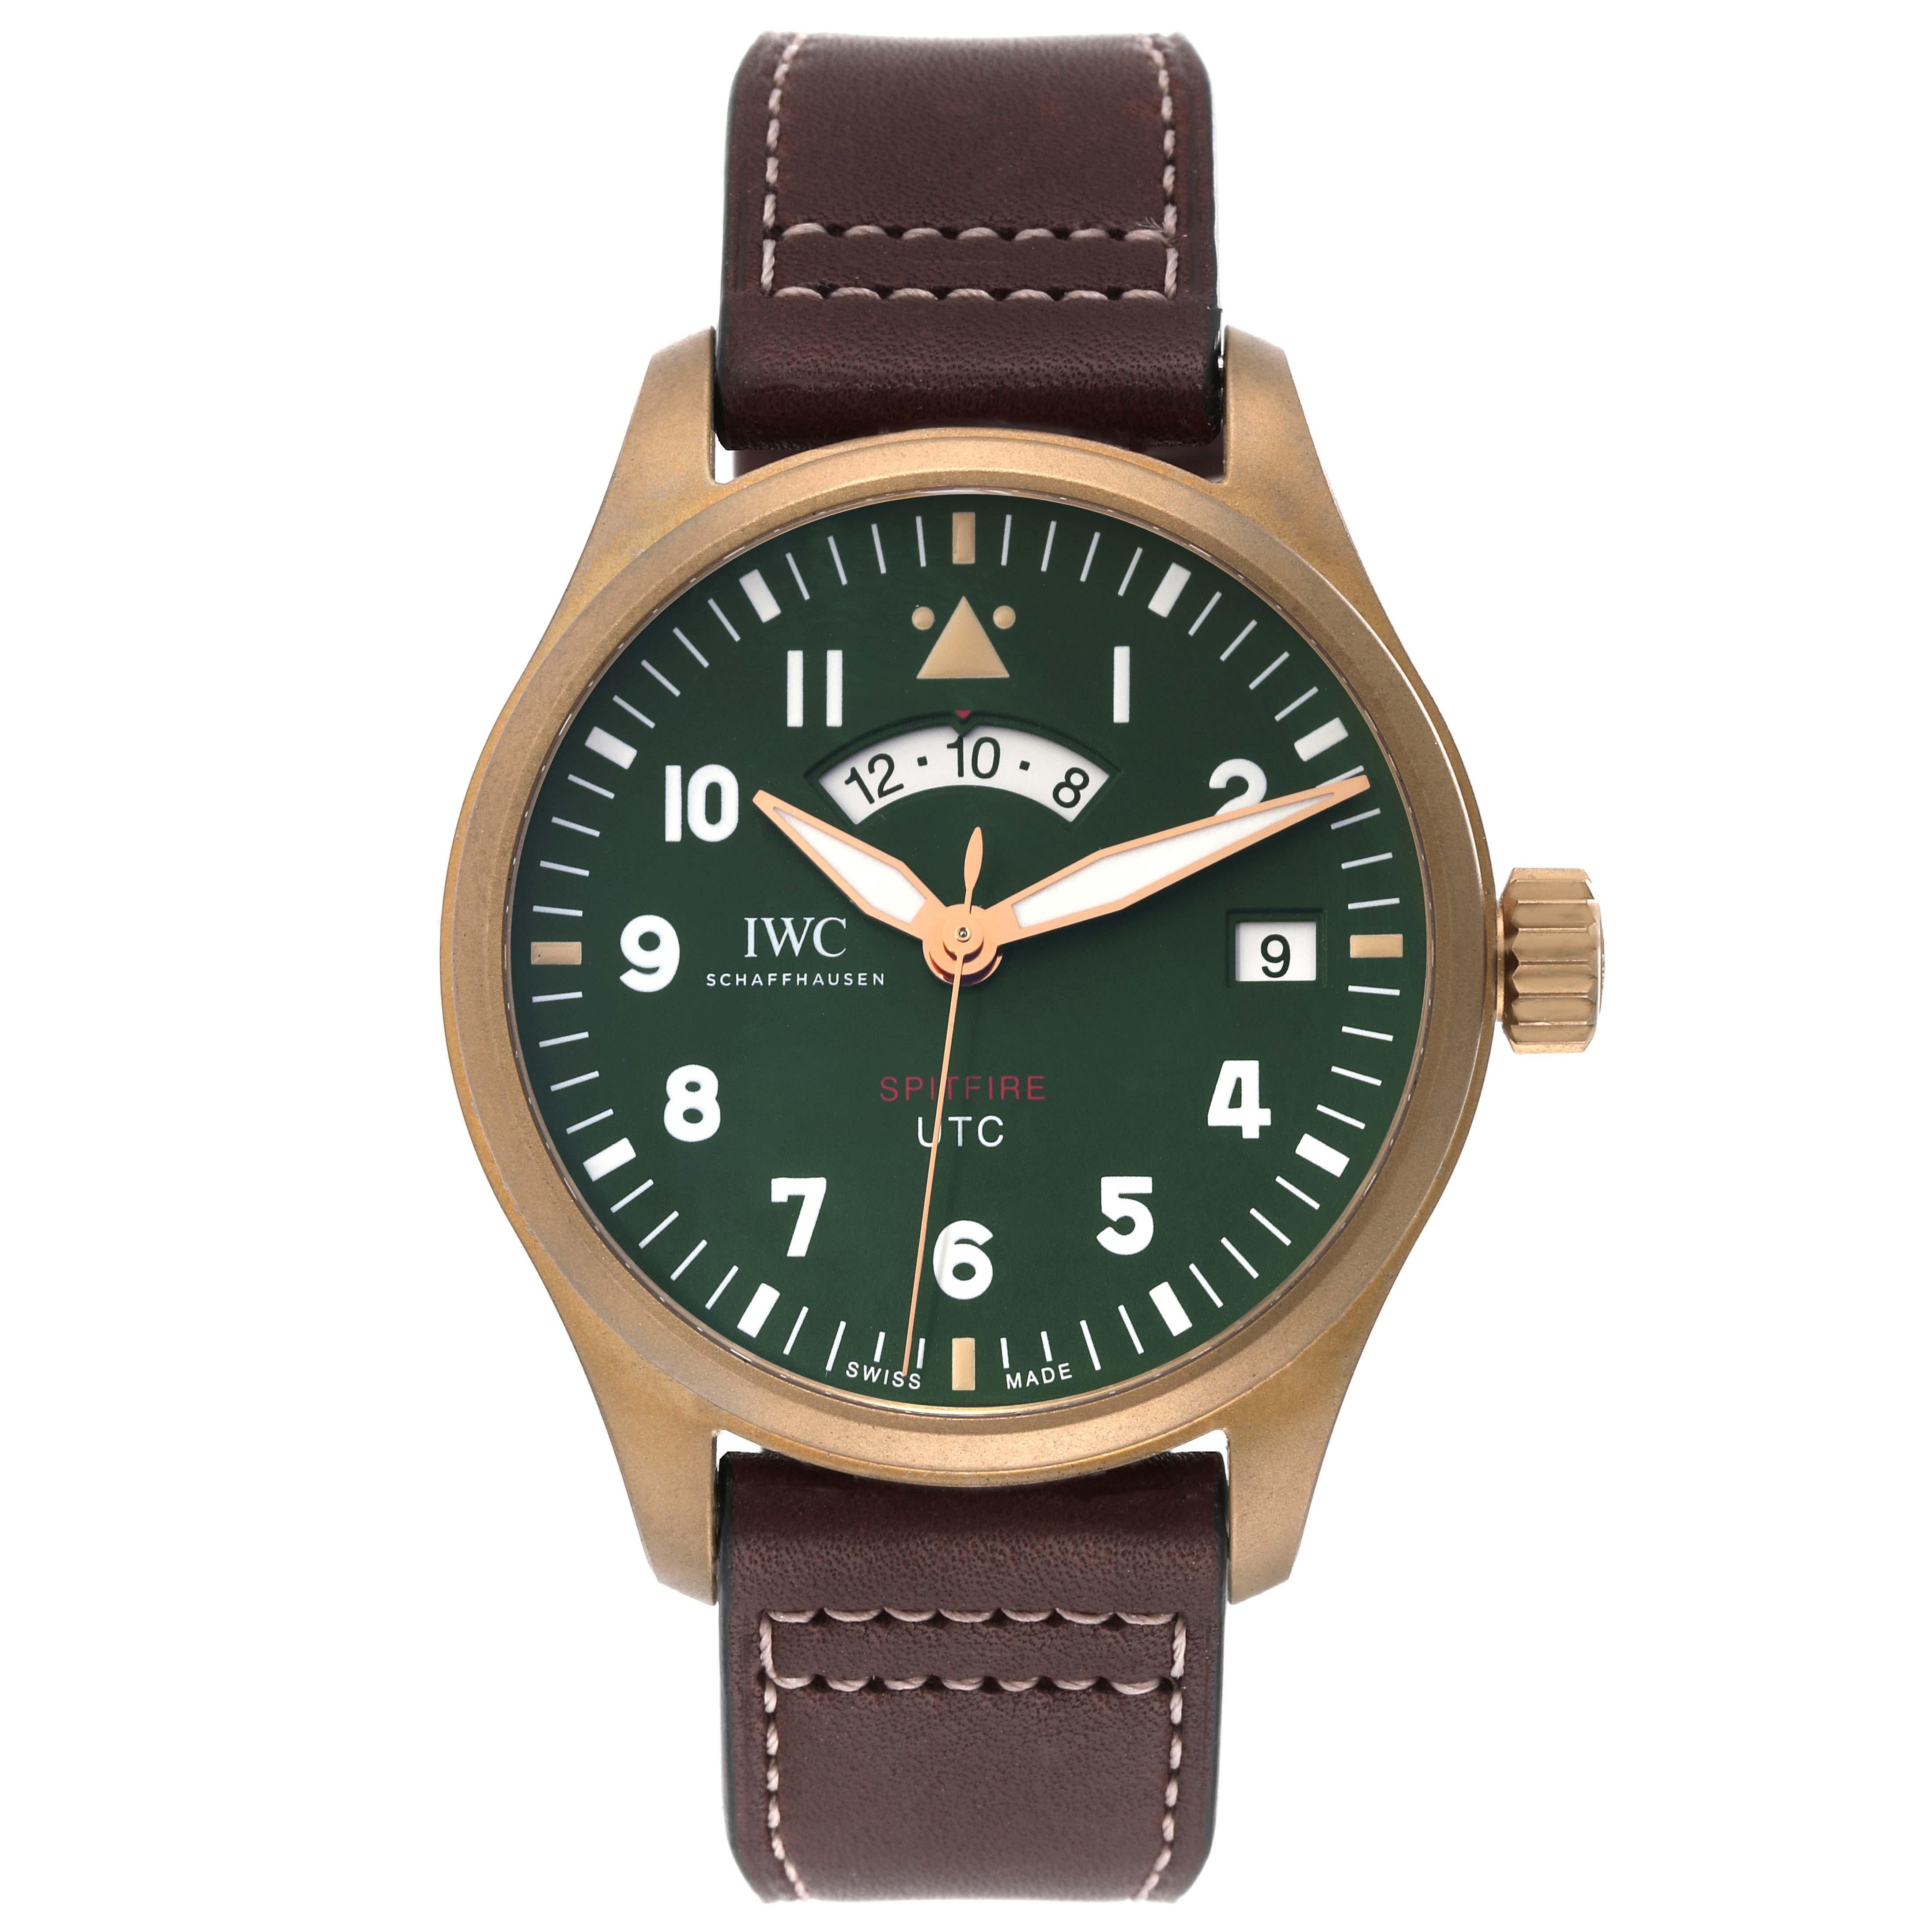 IWC Pilot UTC Spitfire Limited Edition Bronze Mens Watch IW327101 Unworn. Automatic self-winding movement. Bronze case 41.0mm in diameter. Inner soft-iron case for additional protection against magnetic fields. . Scratch resistant sapphire crystal